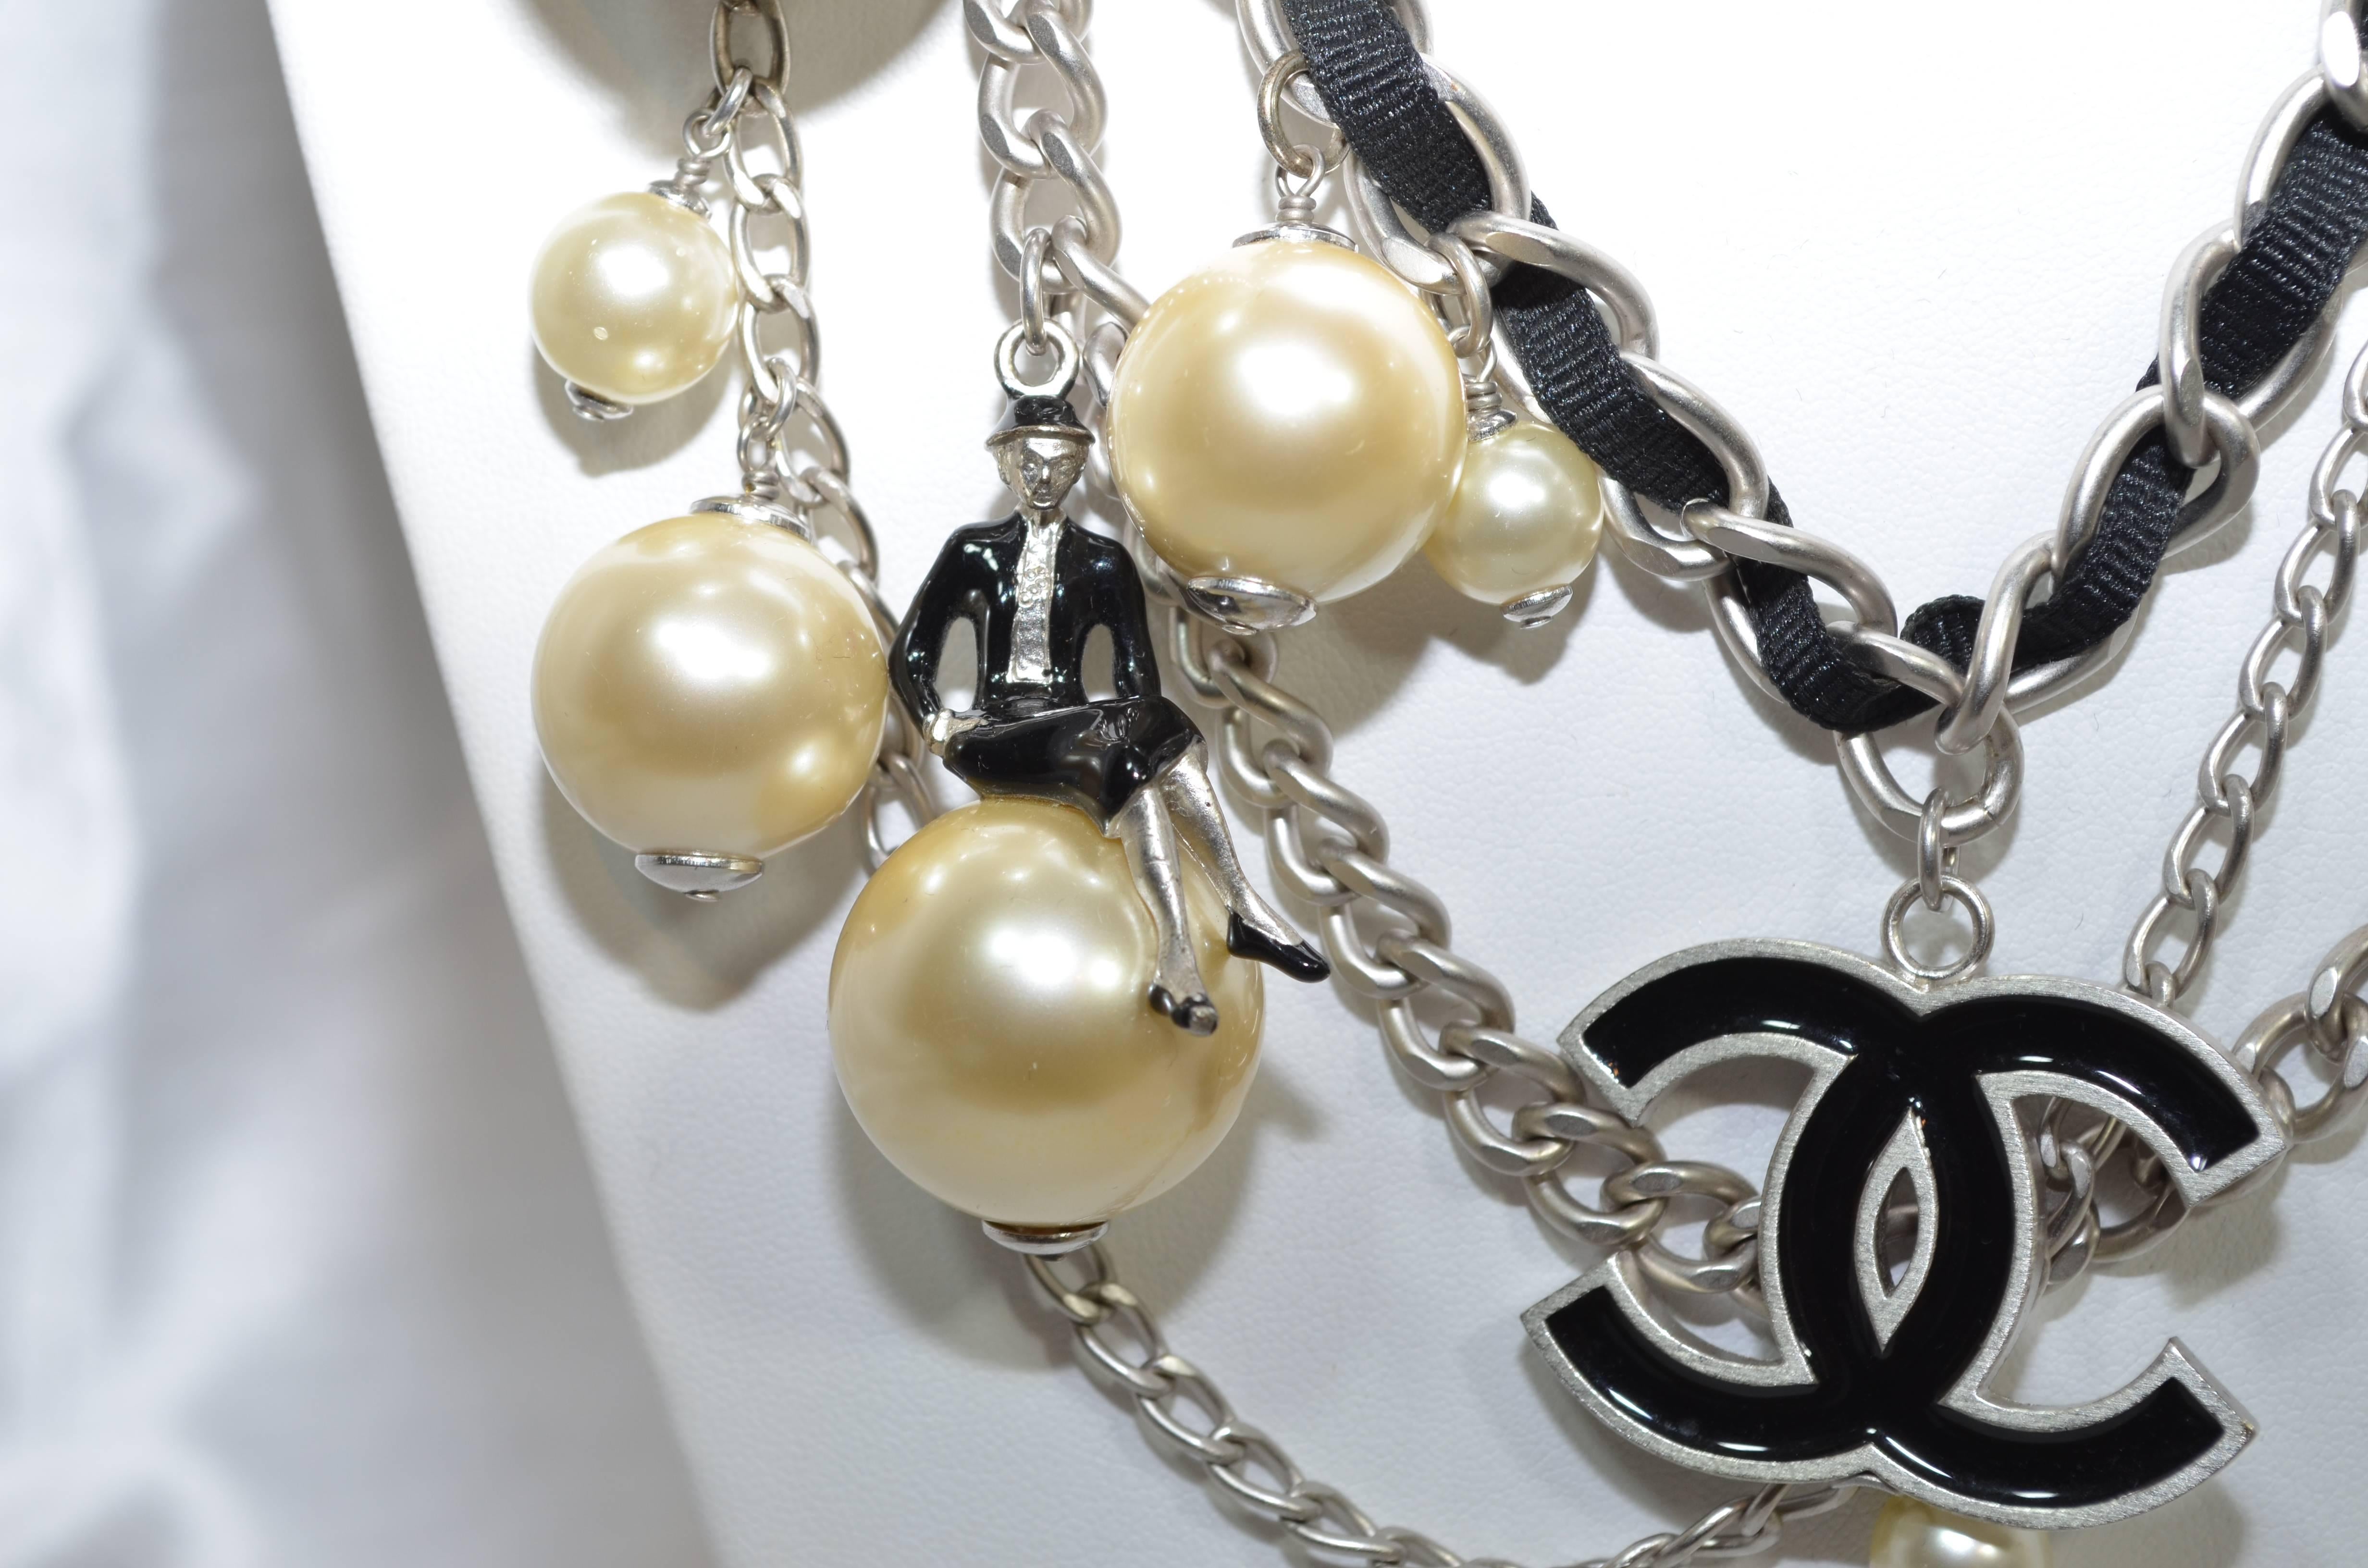 Rare Chanel Spring 2014 Collection Coco Over the Moon belt with CC logo charms, silver-tone multi-strand chain-links, and pearl embellishments, several pearls have Coco Chanel figure on with enamel suit sitting on them. Hook closure. Approximate